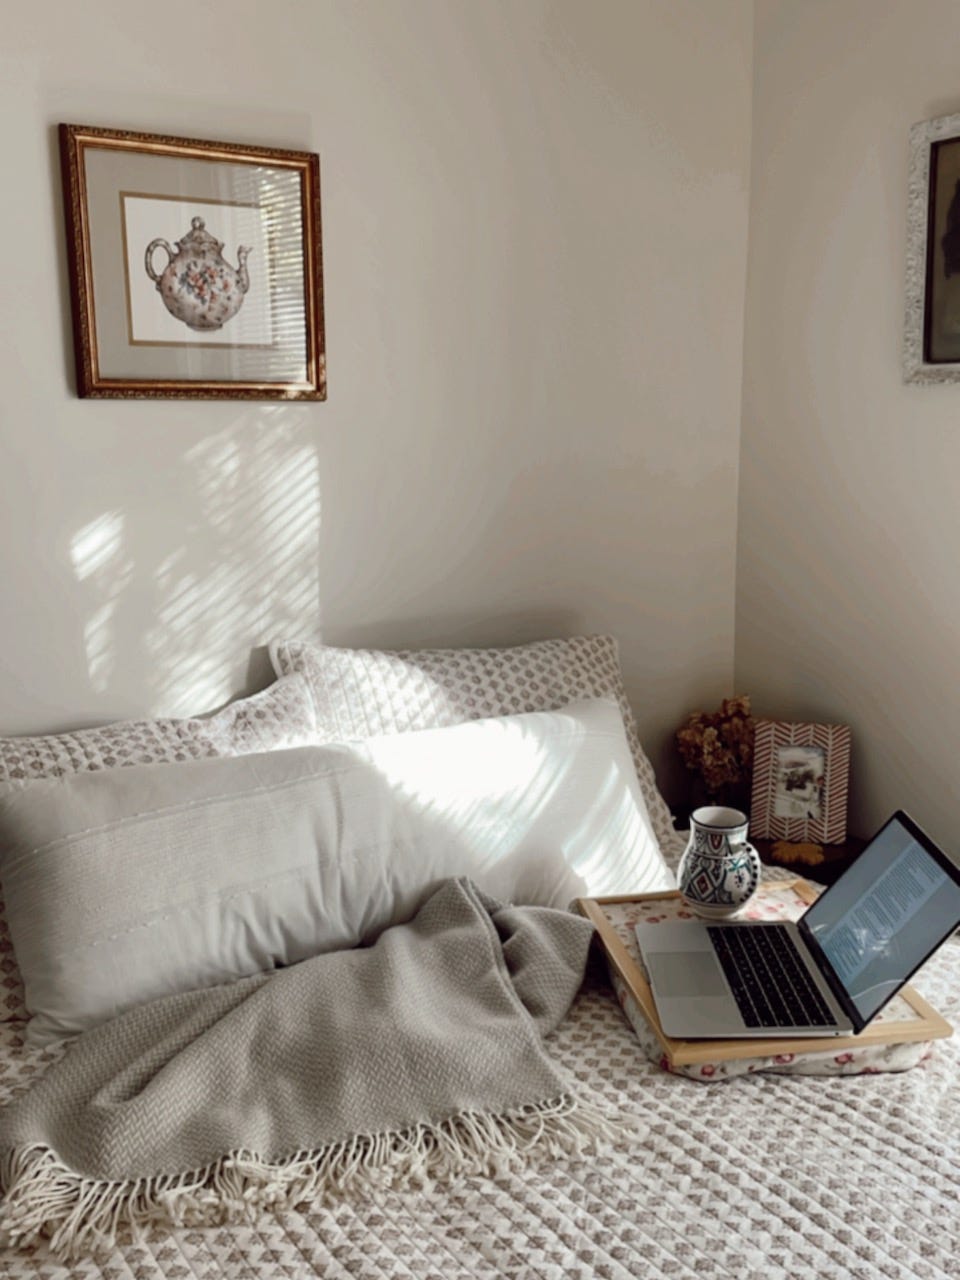 A bed with a pink quilt has an open laptop, blanket, and mug resting on top. A picture of a teapot is hanging on the wall.